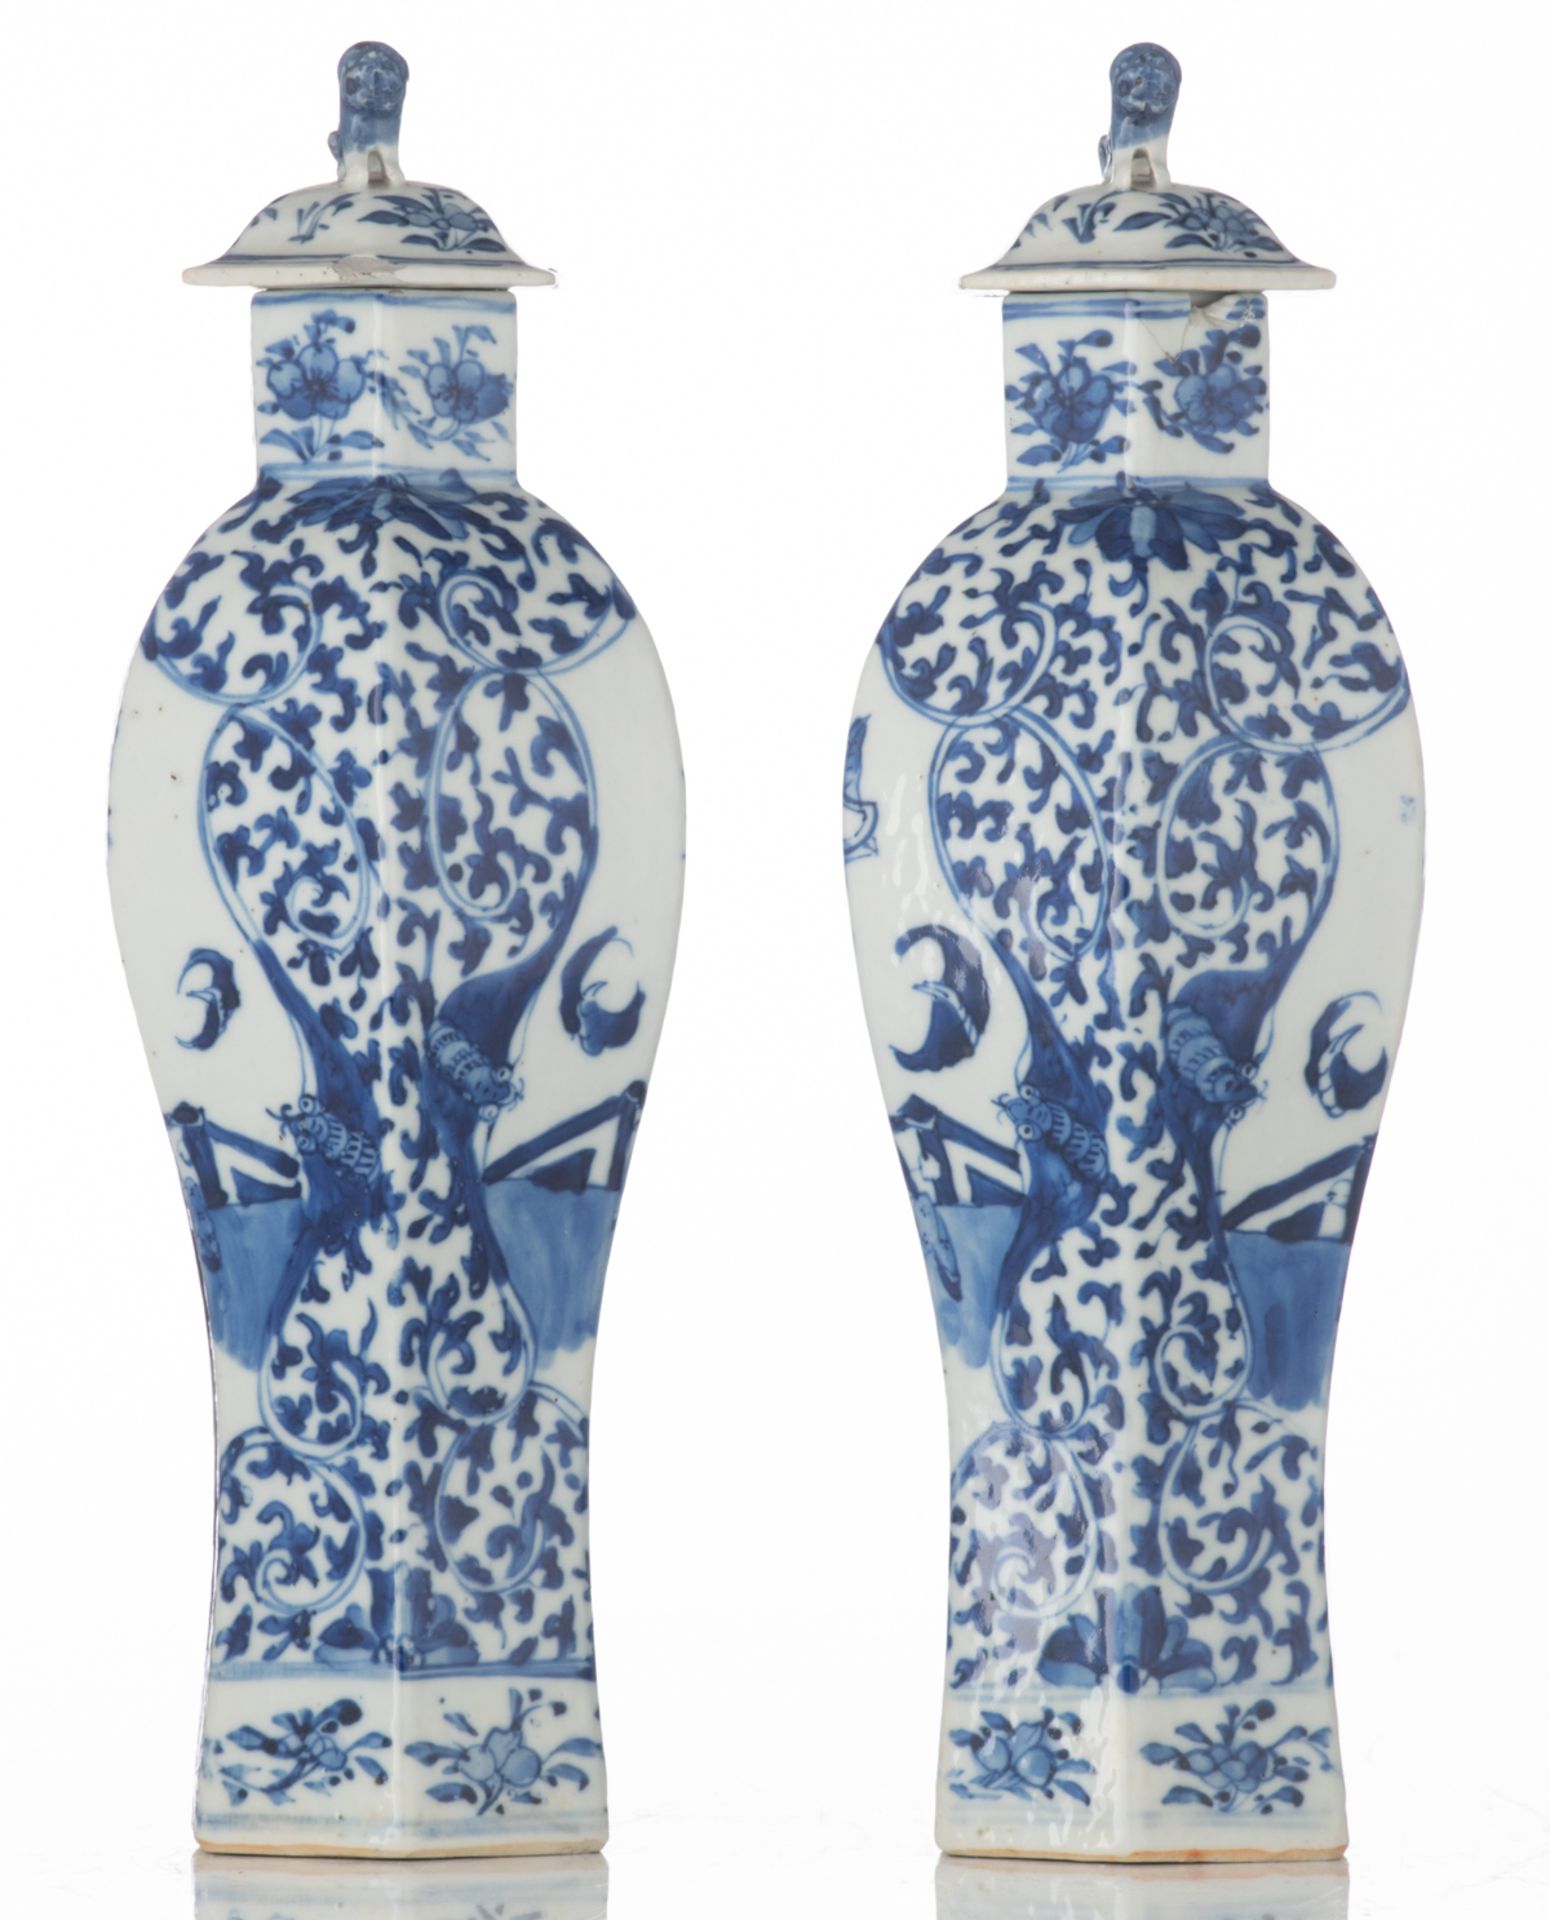 A pair of Chinese hexagonal porcelain vases and covers, blue and white decorated with figures in a p - Image 4 of 7